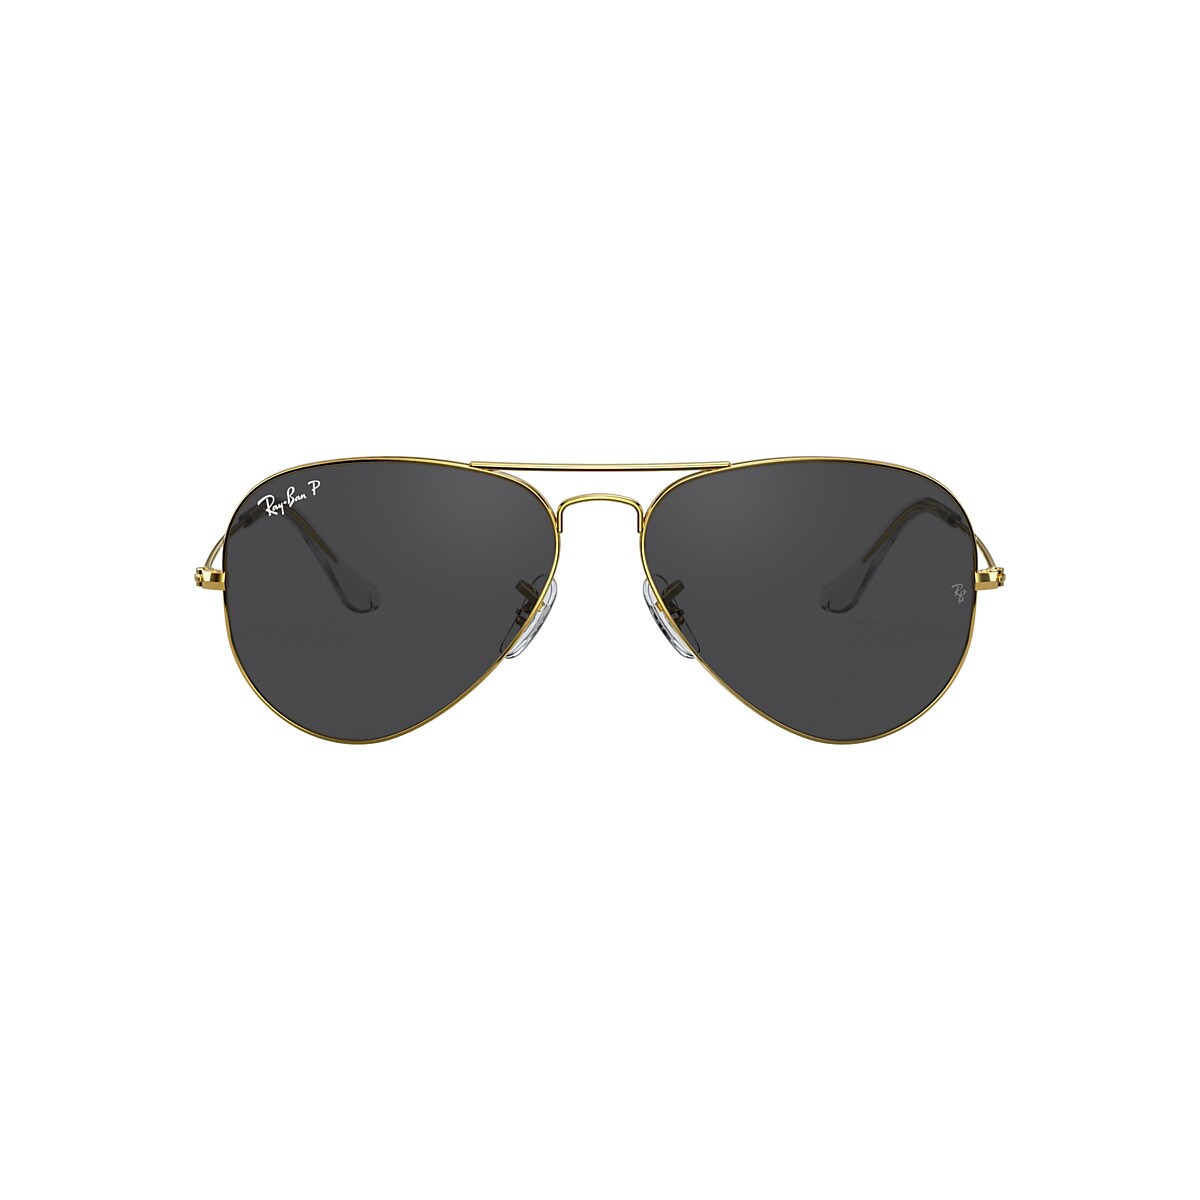 Aviator Classic Gold Frame Black Lens Sunglasses by Ray-Ban